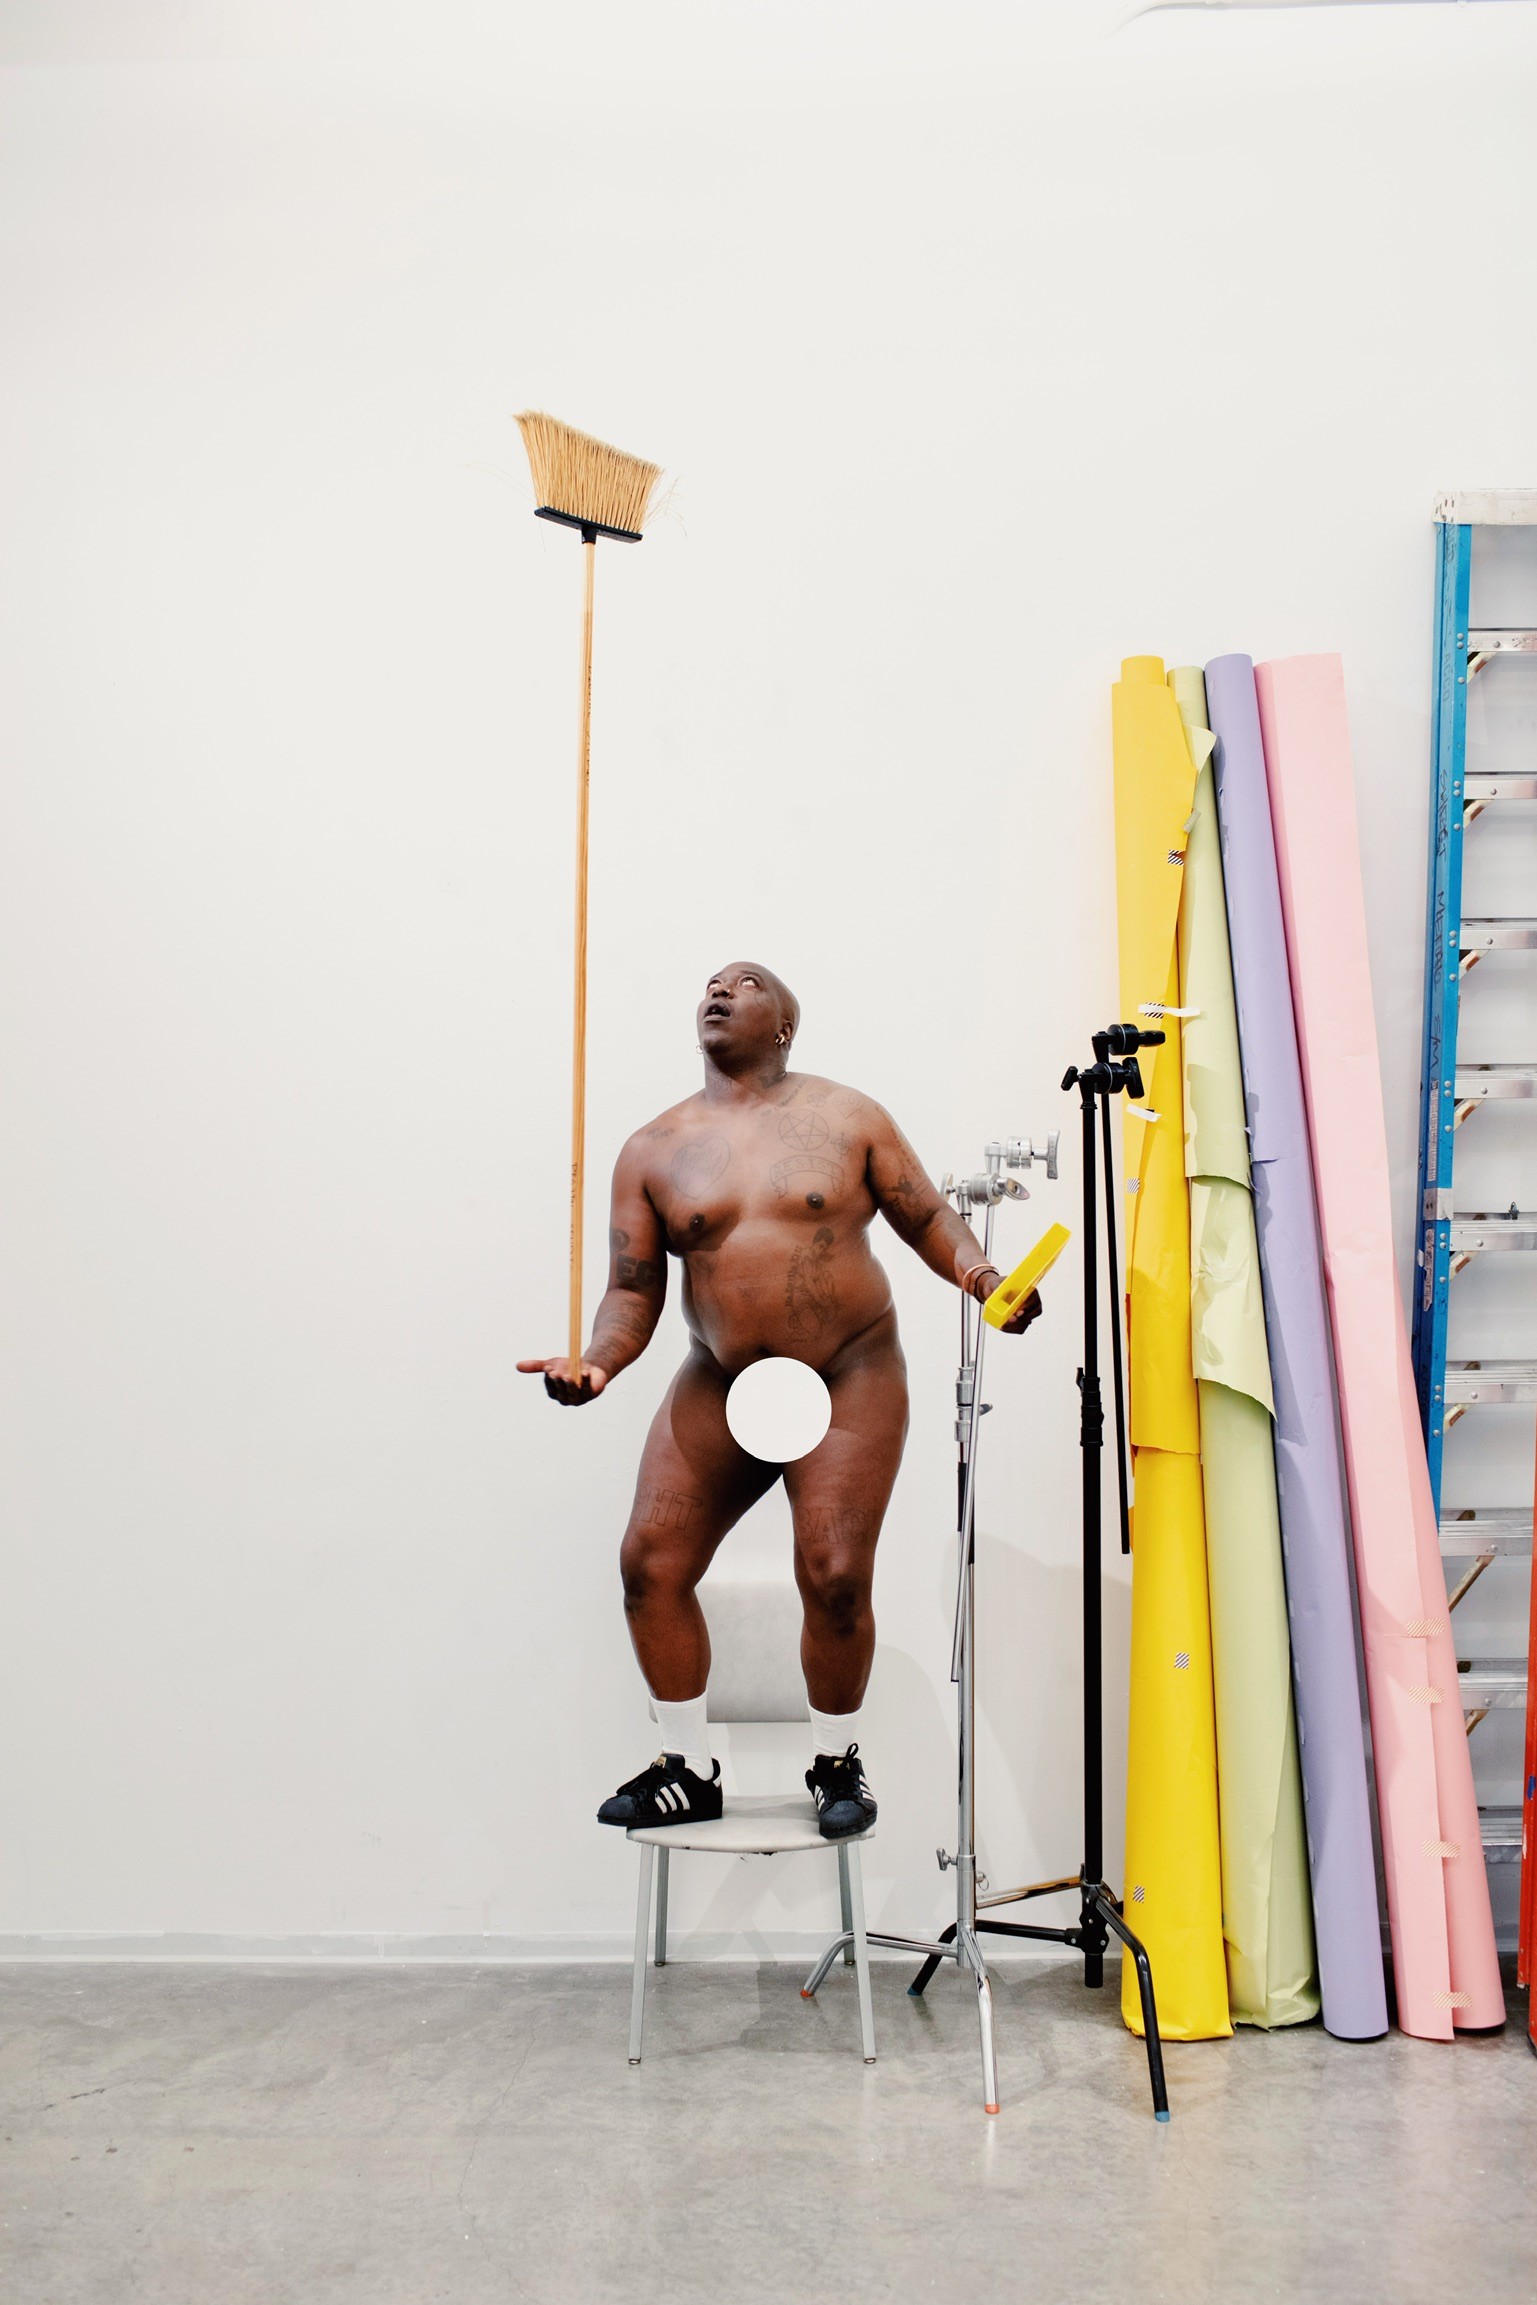 Brontez balancing a broom stick - the subject of a series by photographer Dominique HILDEBRAND entitled "Ego Sculptures".